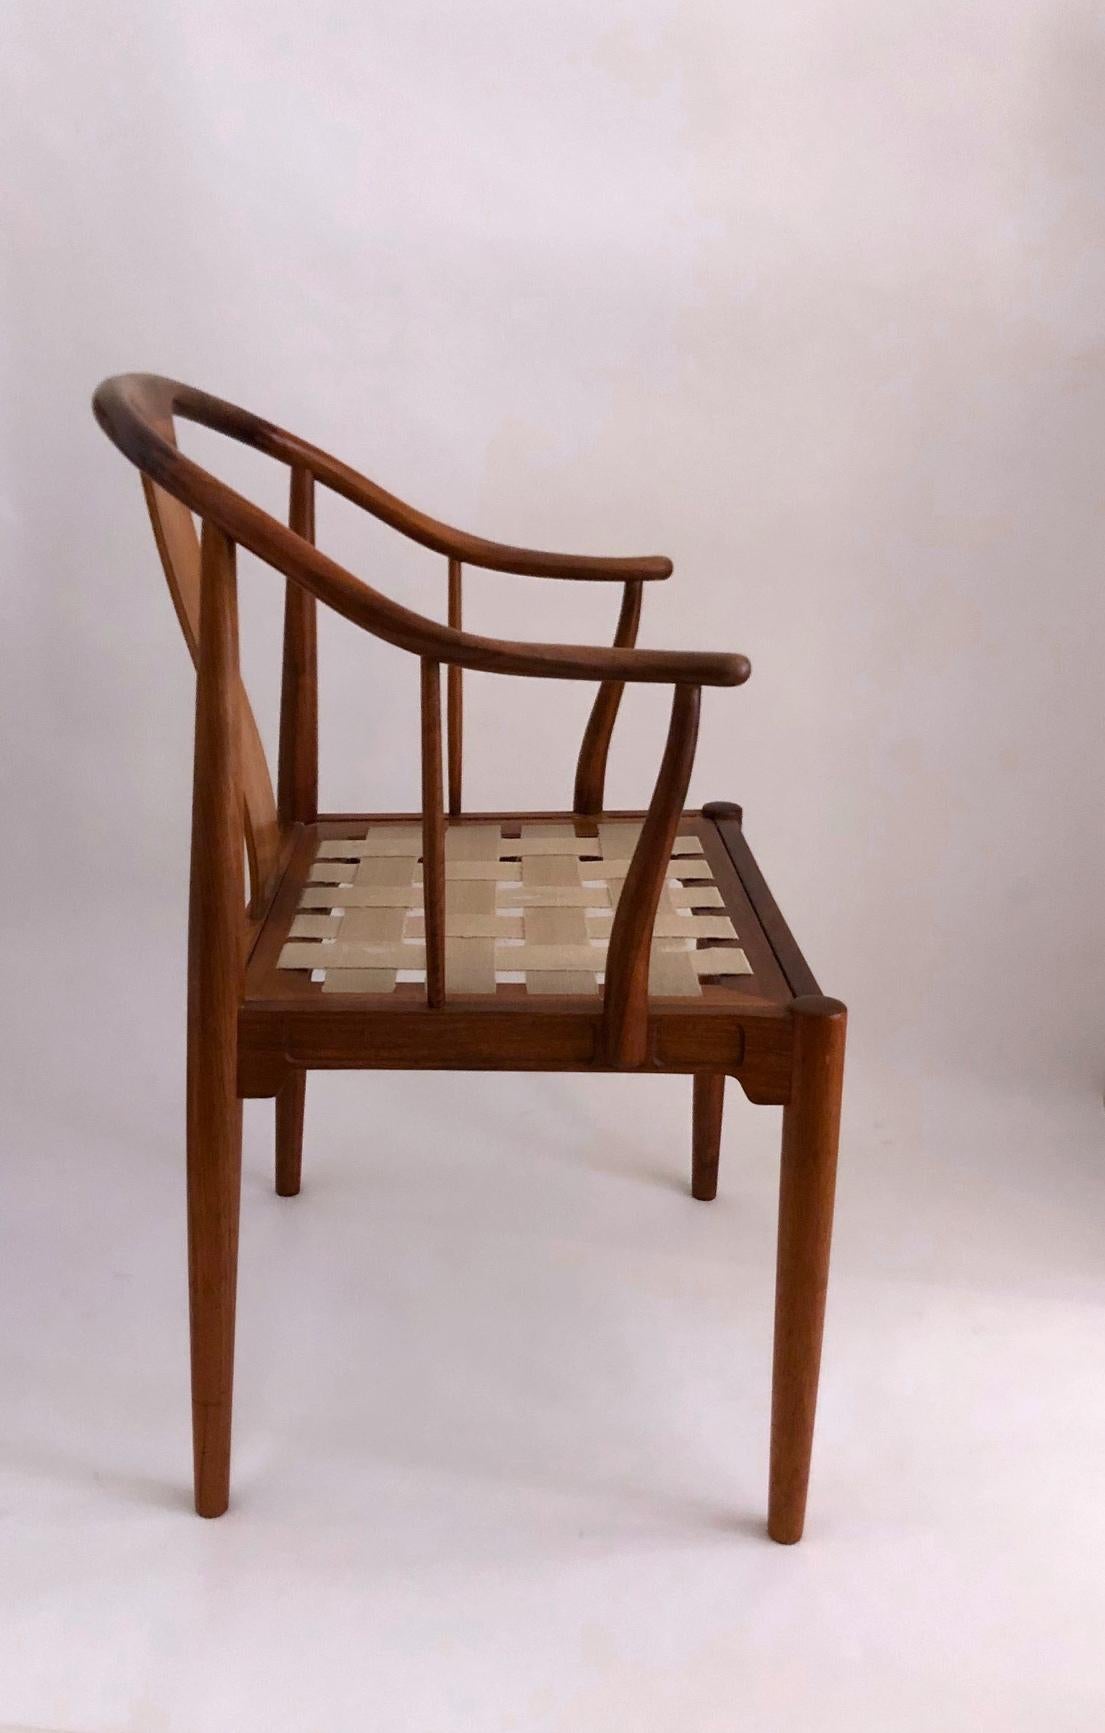 Hans J. Wegner, a 1977 Limited Edition Walnut Armchair “China Chair” In Good Condition For Sale In Paris, FR